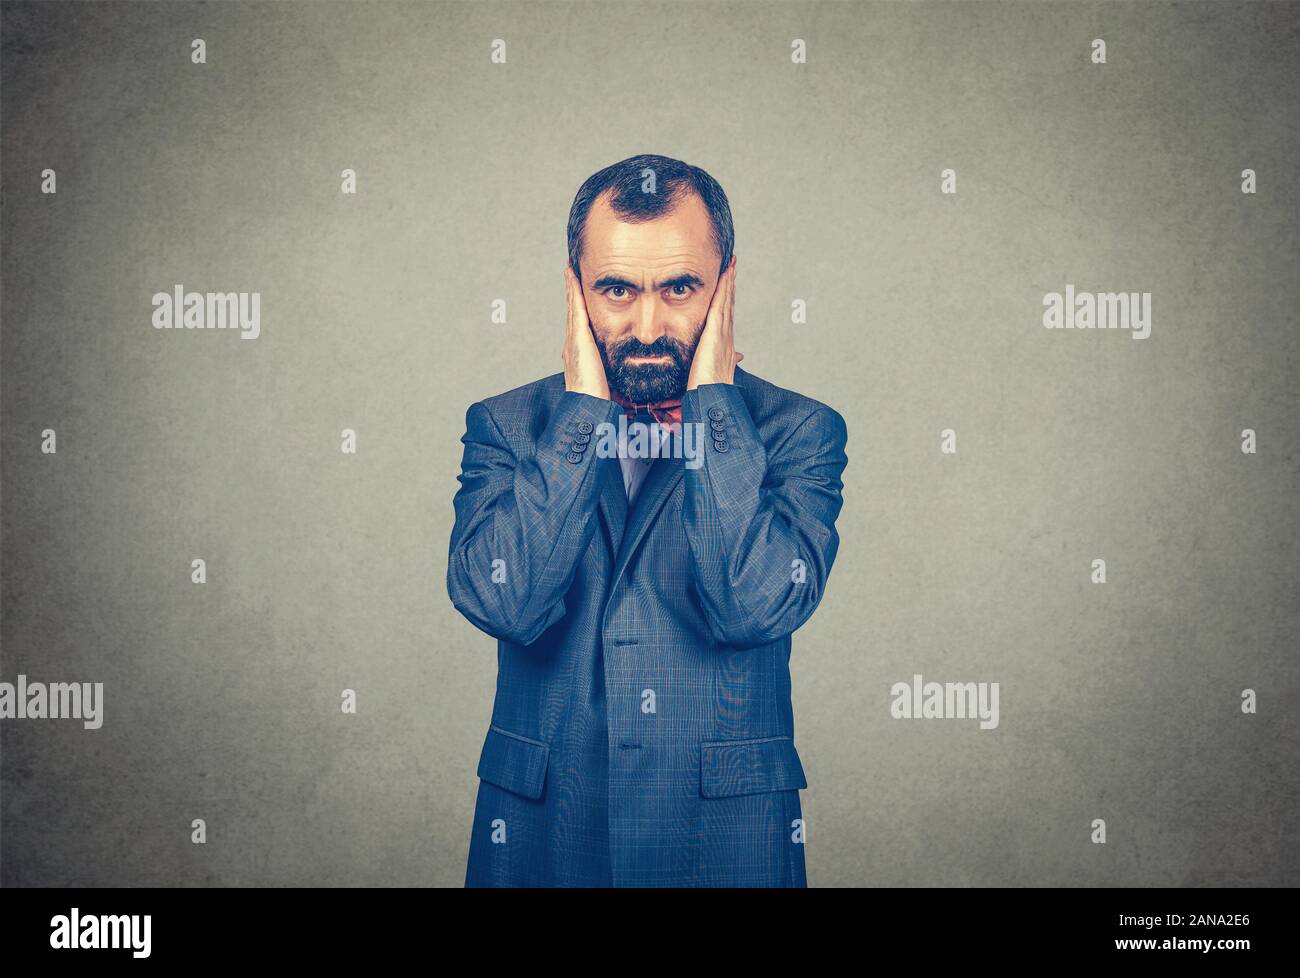 Man hands on ears with calm face expression. Hear no evil concept. Mixed race bearded model isolated on gray studio wall background with copy space. H Stock Photo